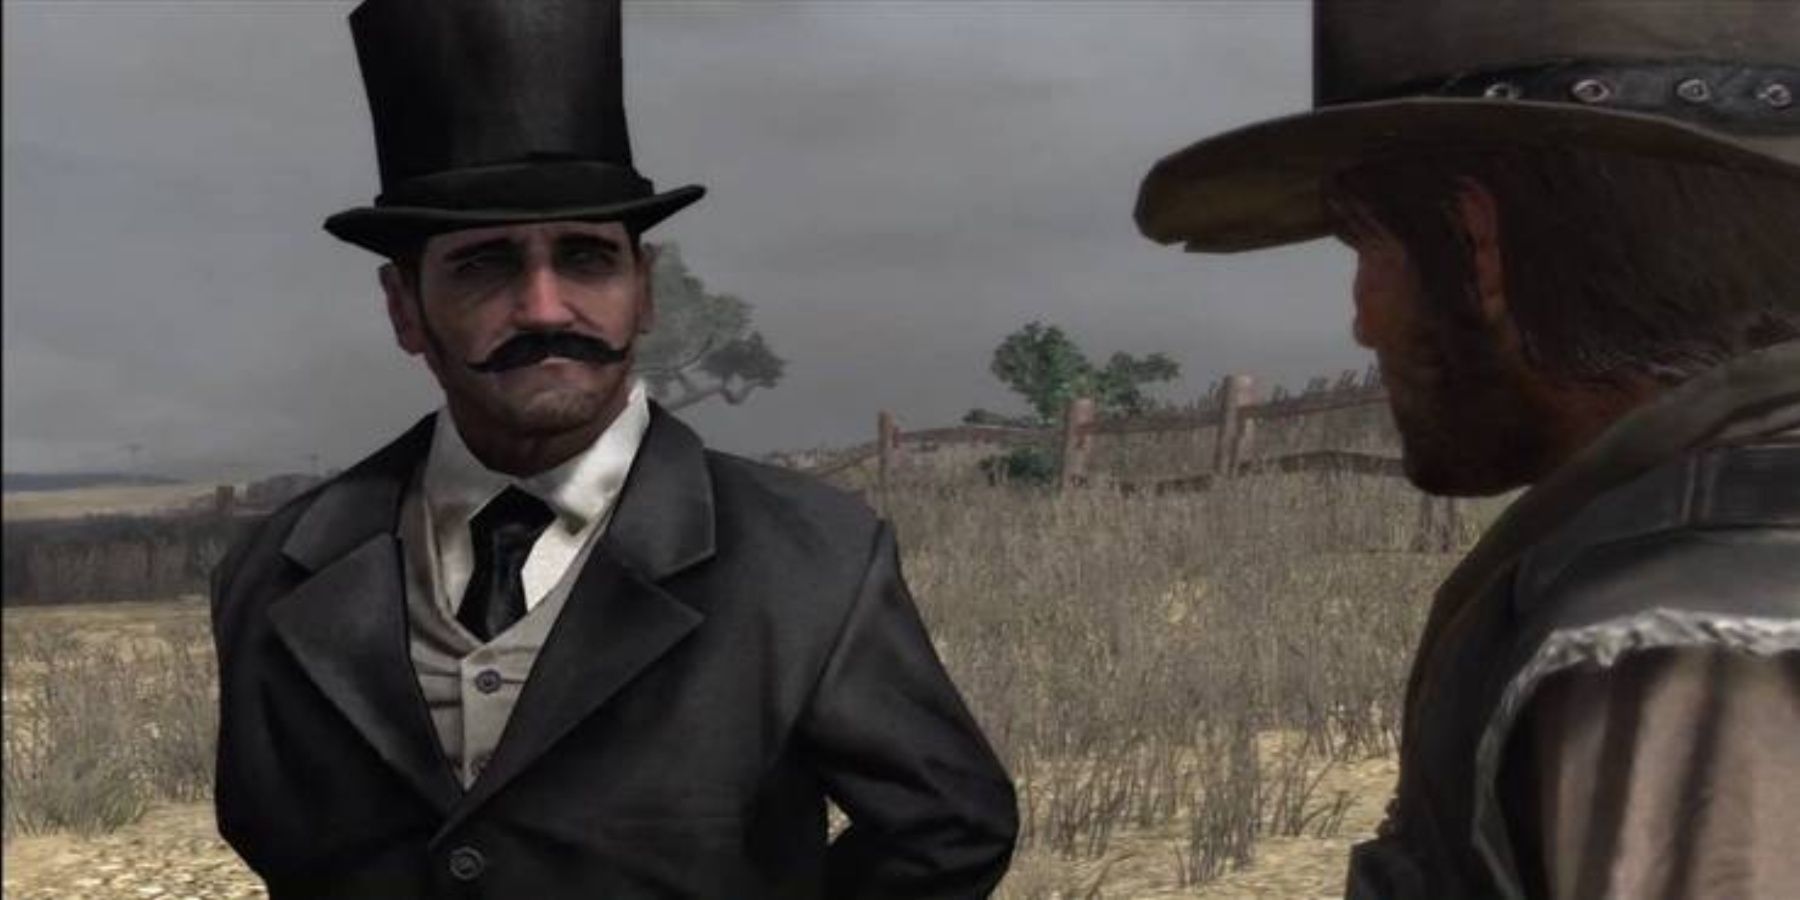 The Strange Man, a man with a top hat and handlebar moustache, looking at Arthur in Red Dead Redemption 2